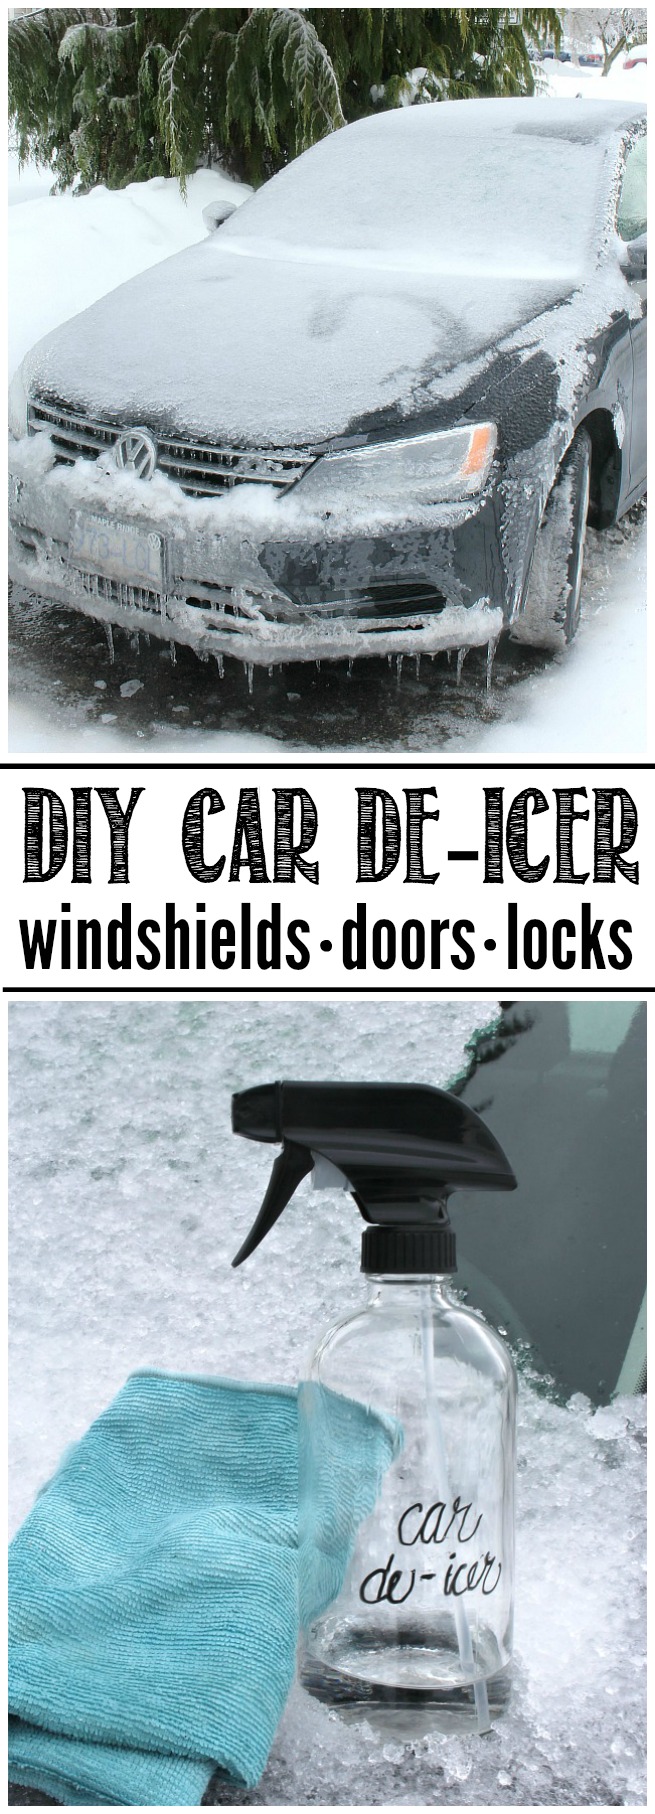 Simple DIY car de-icer.  Makes getting rid of that ice SO easy for windshields, doors, and locks.  A MUST for that winter weather!